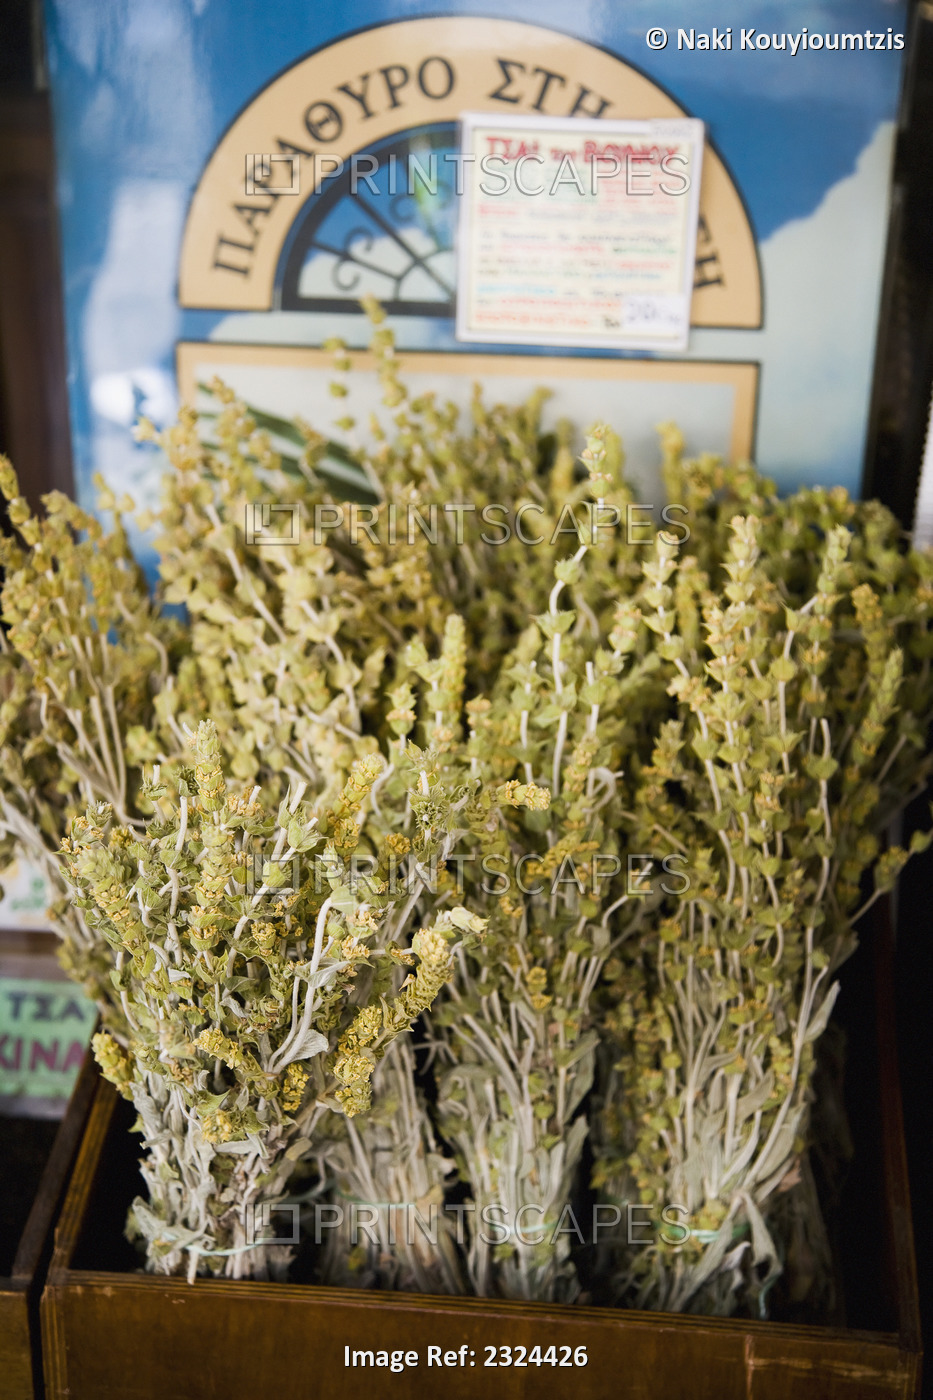 Greece, Spice emporium specializing in traditional Greek herbs and teas; ...